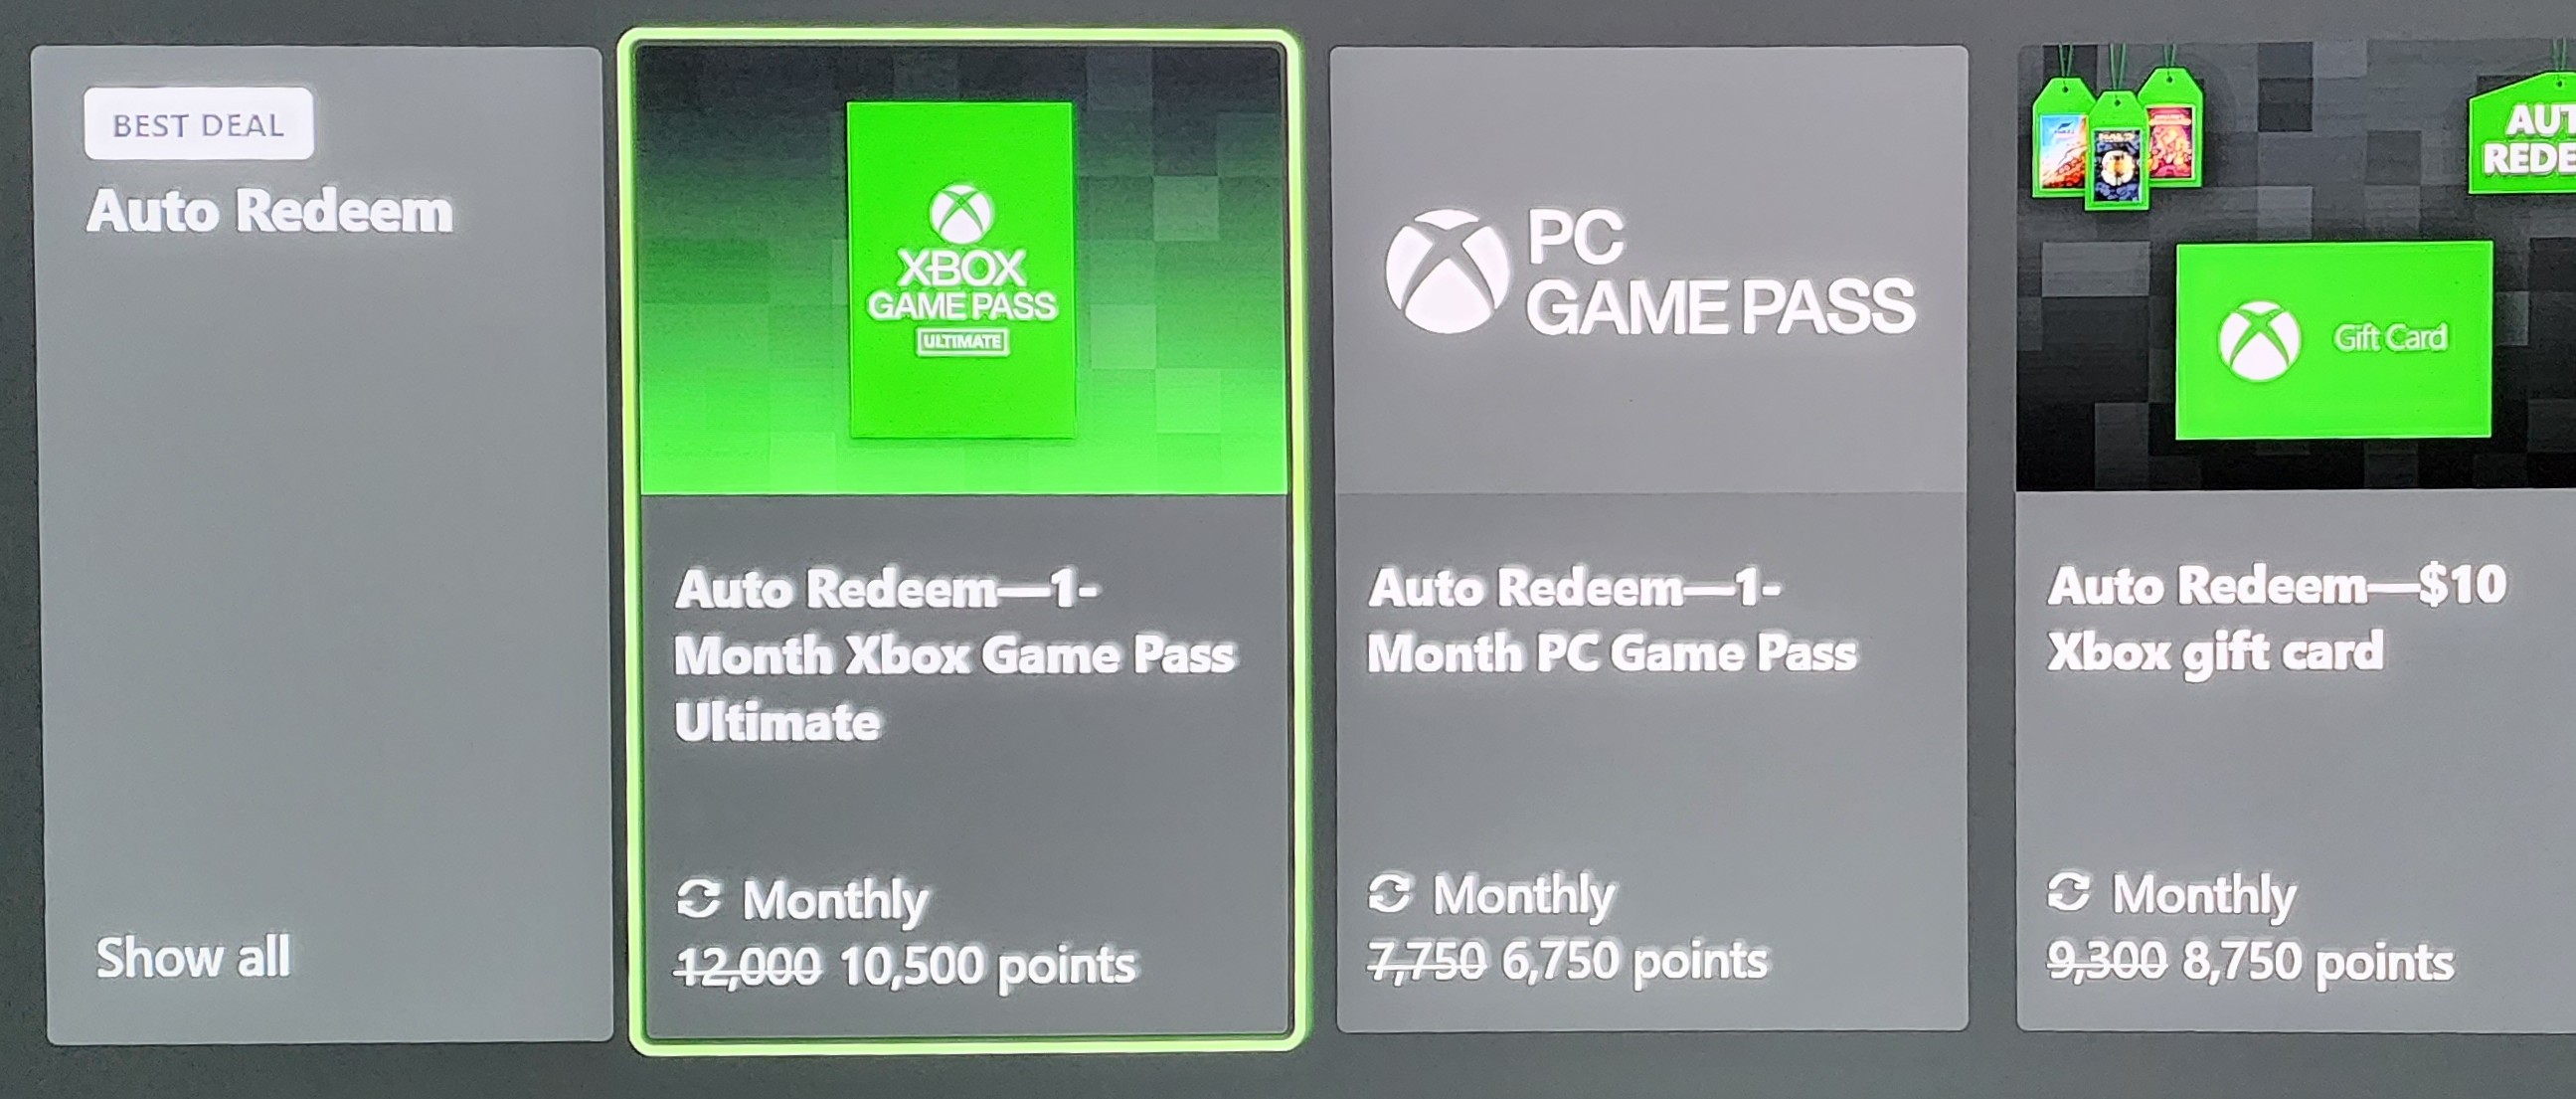 Microsoft Rewards Offers No Redeemable Xbox Game Pass Ultimate